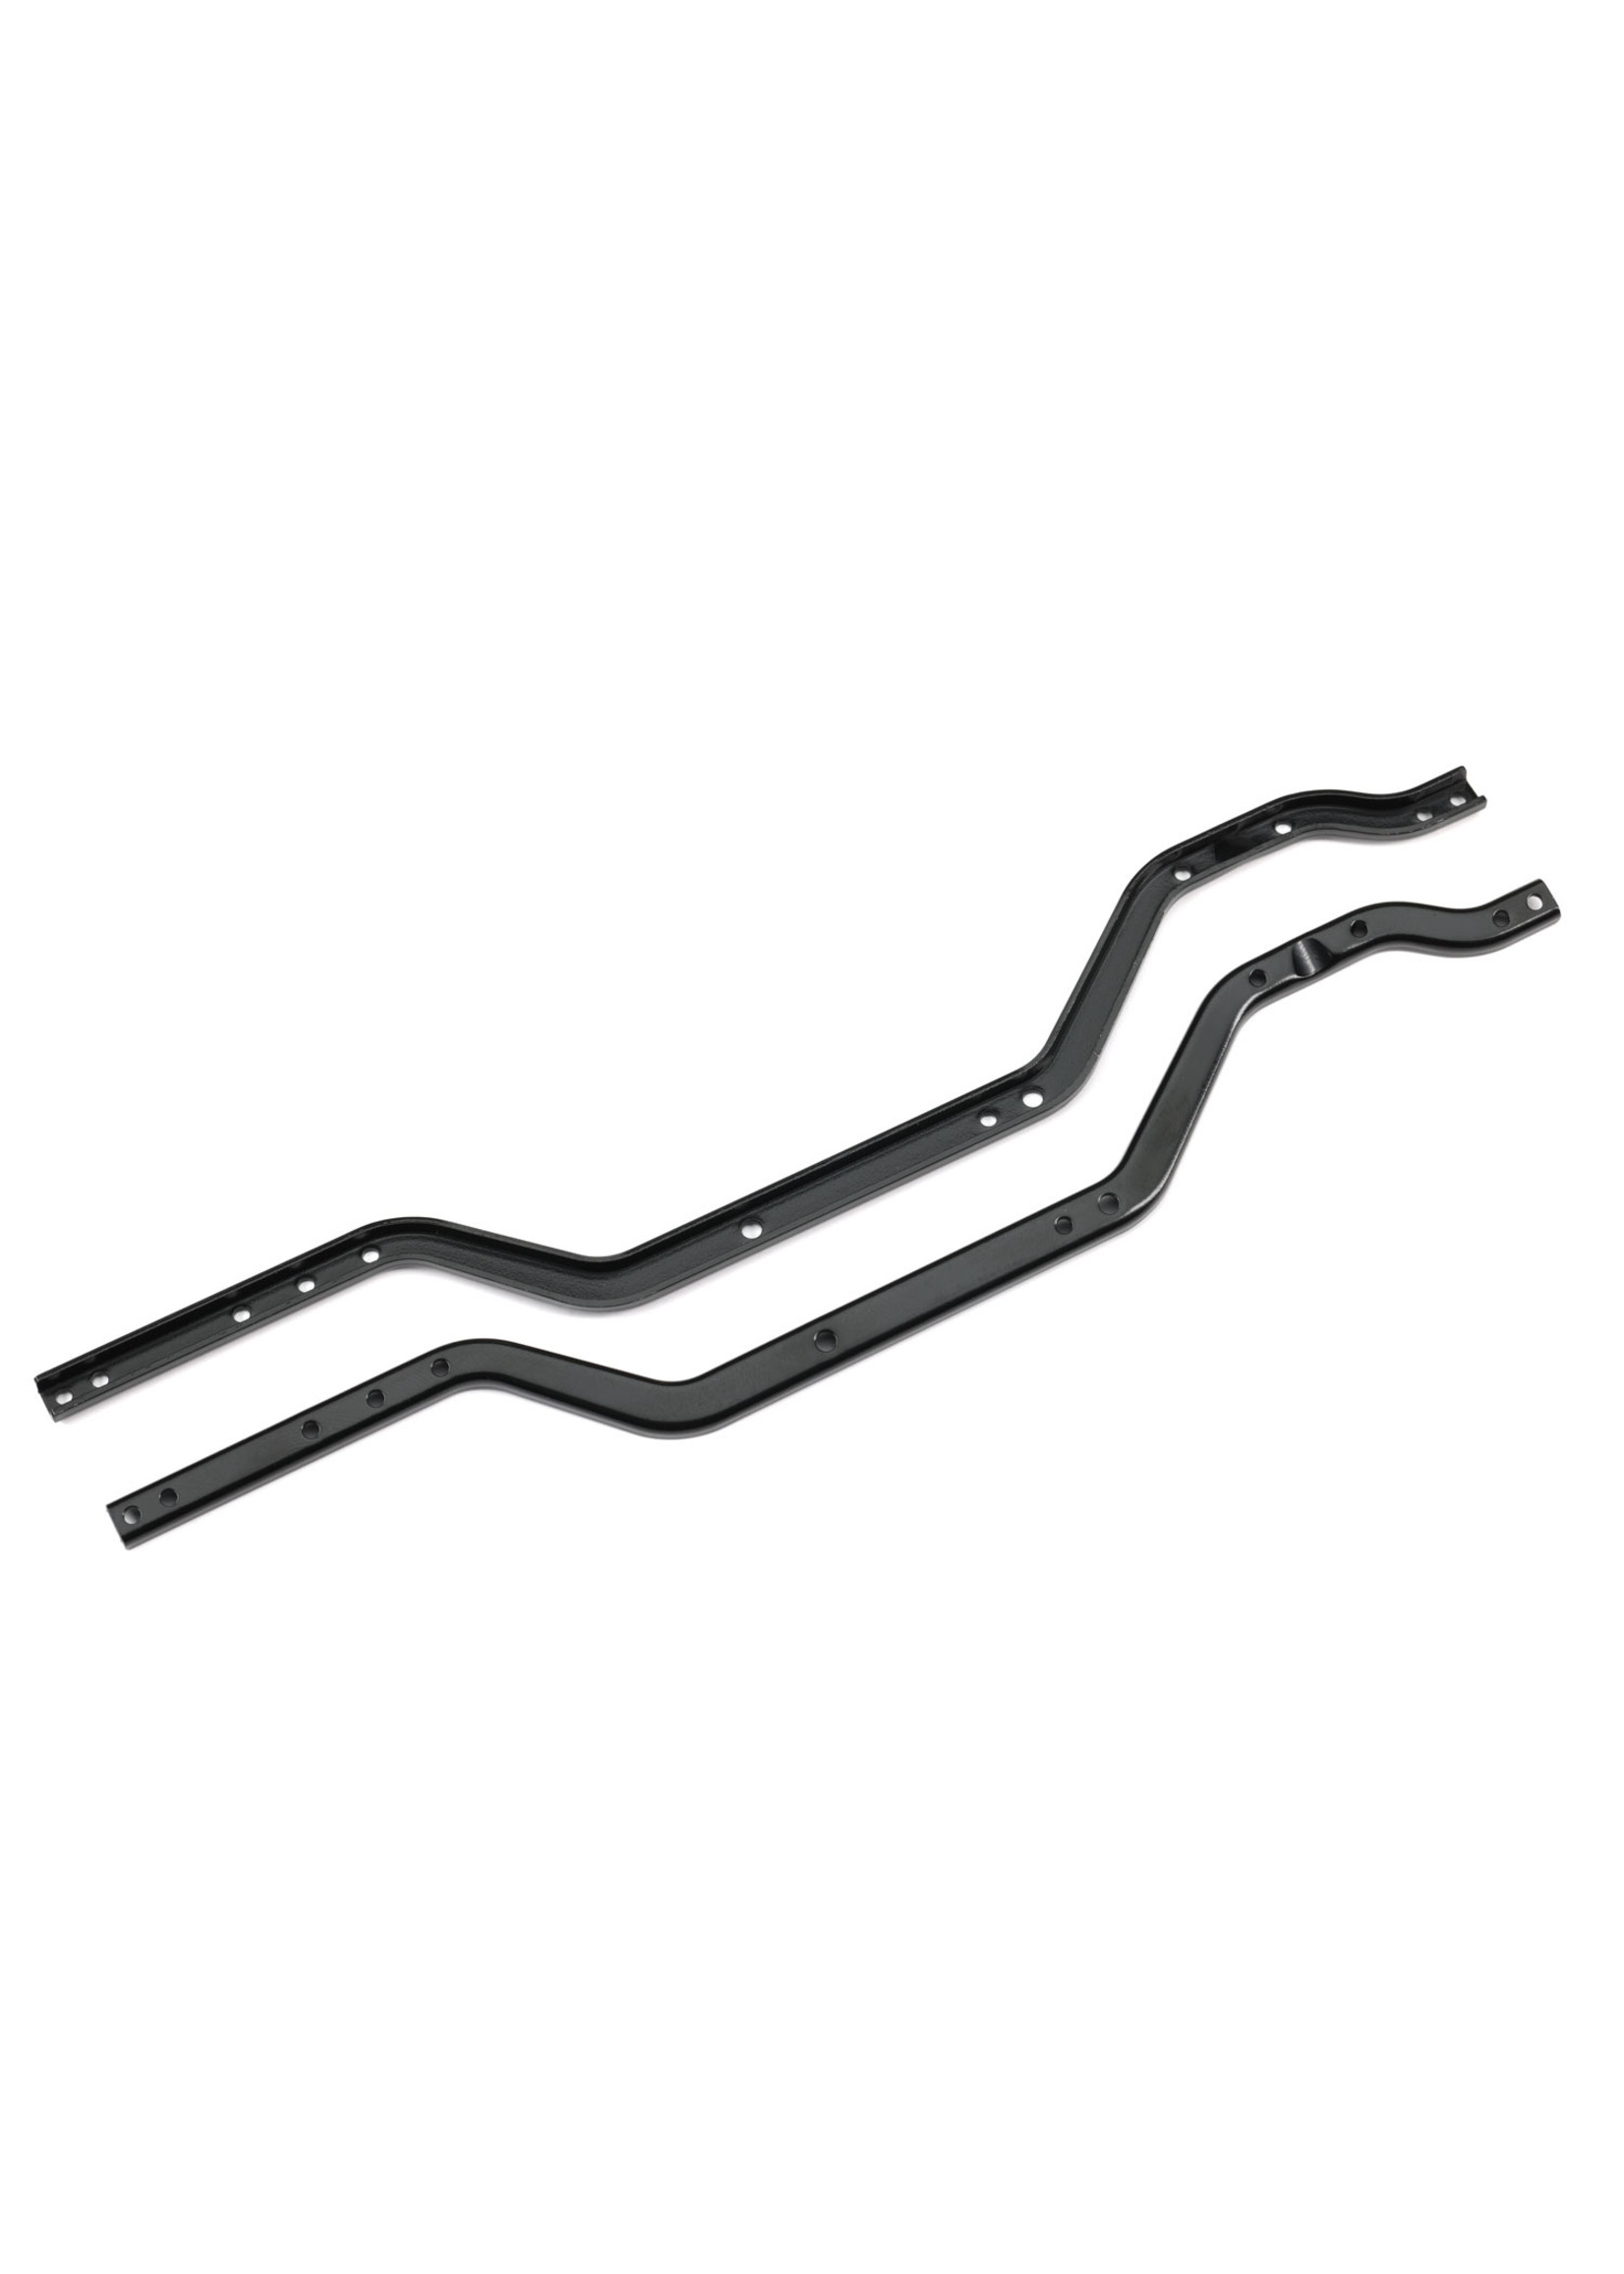 Traxxas 9722 - Chassis Rails, 202mm Steel, L/R